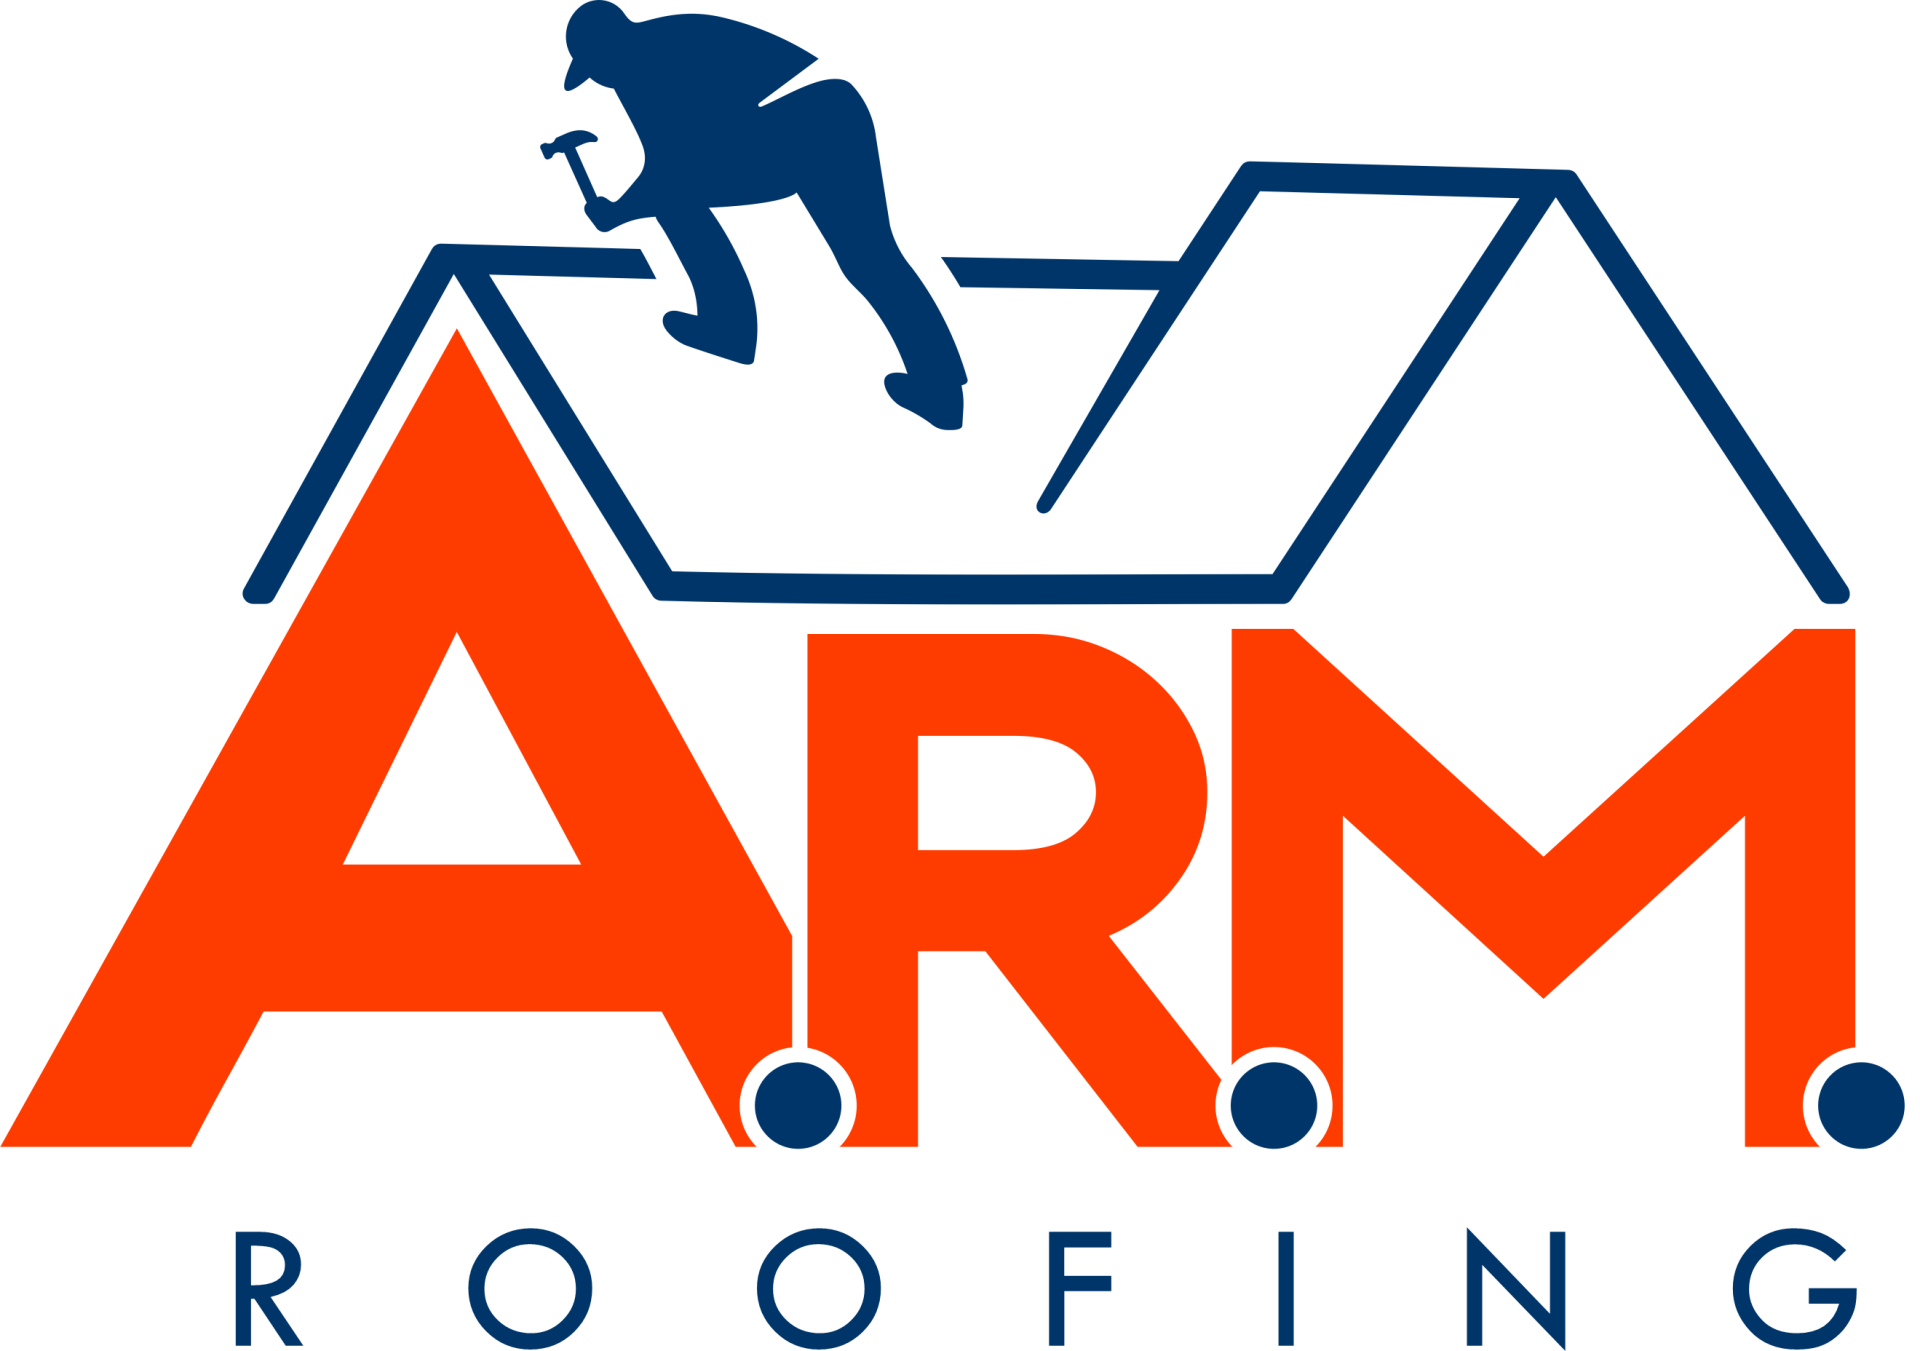 roofing company logos